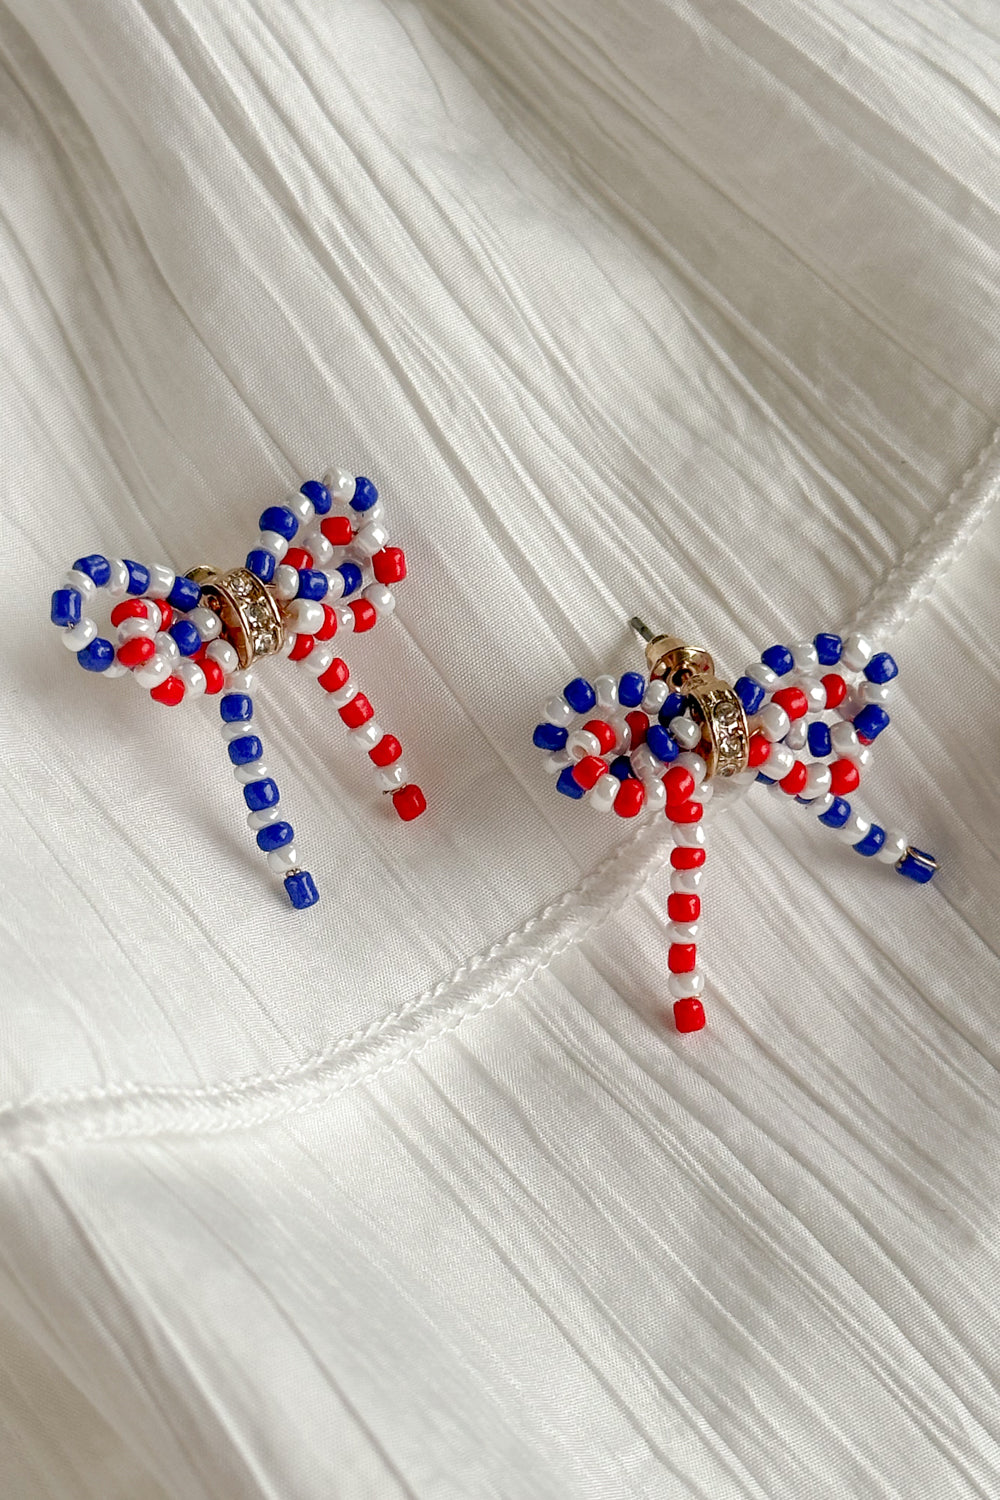 Image shows Quinn Red, White, & Blue Bow Earrings against a white background. Earrings have red white and blue beads in the shape of a bow, and the center is gold with rhinestones.